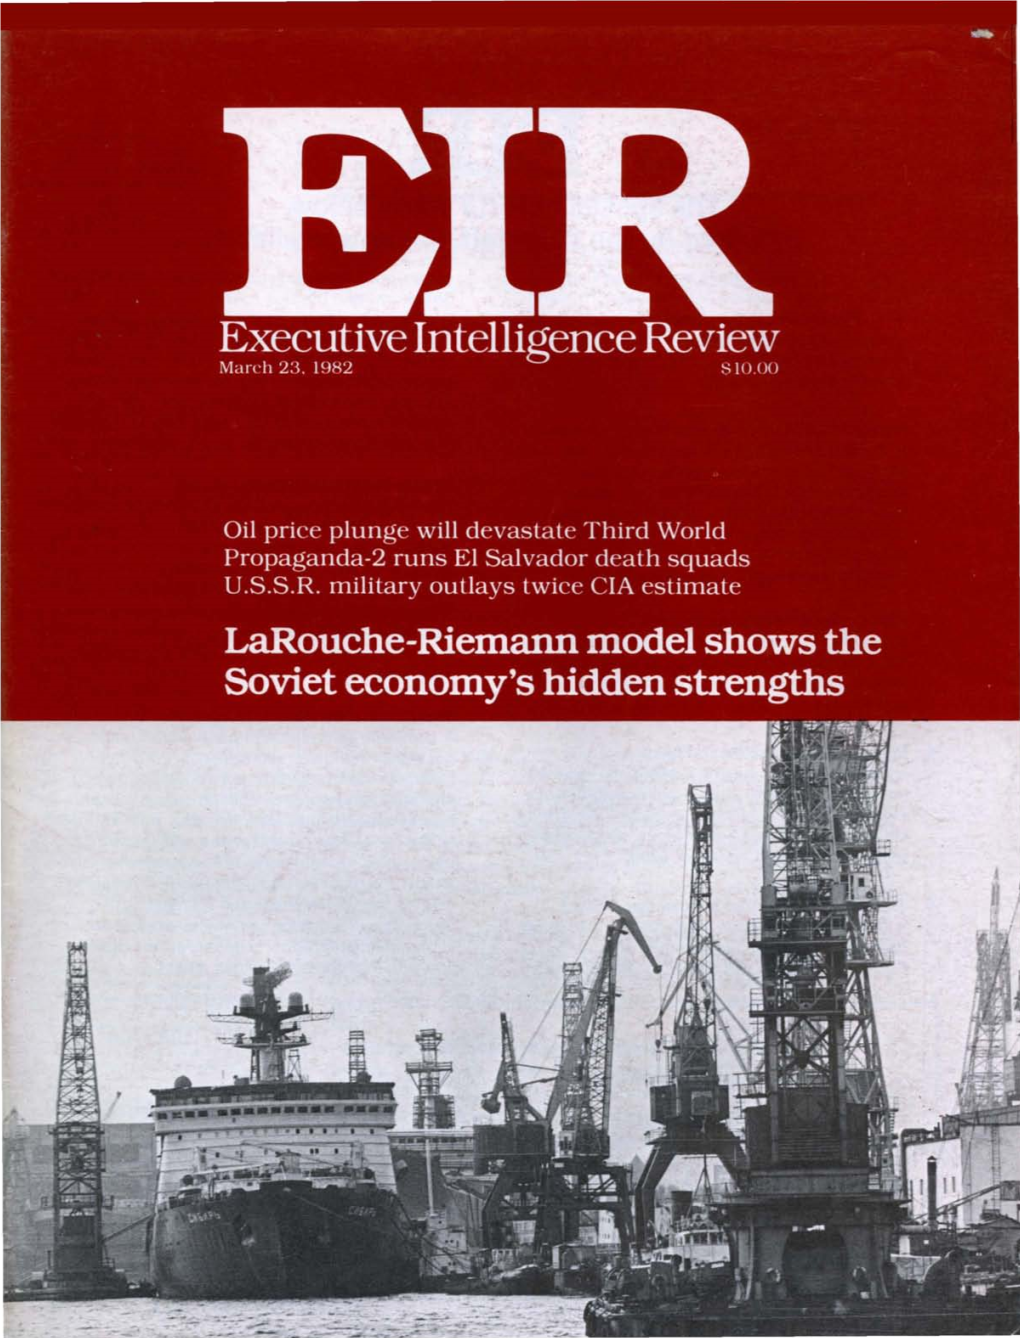 Executive Intelligence Review, Volume 9, Number 11, March 23